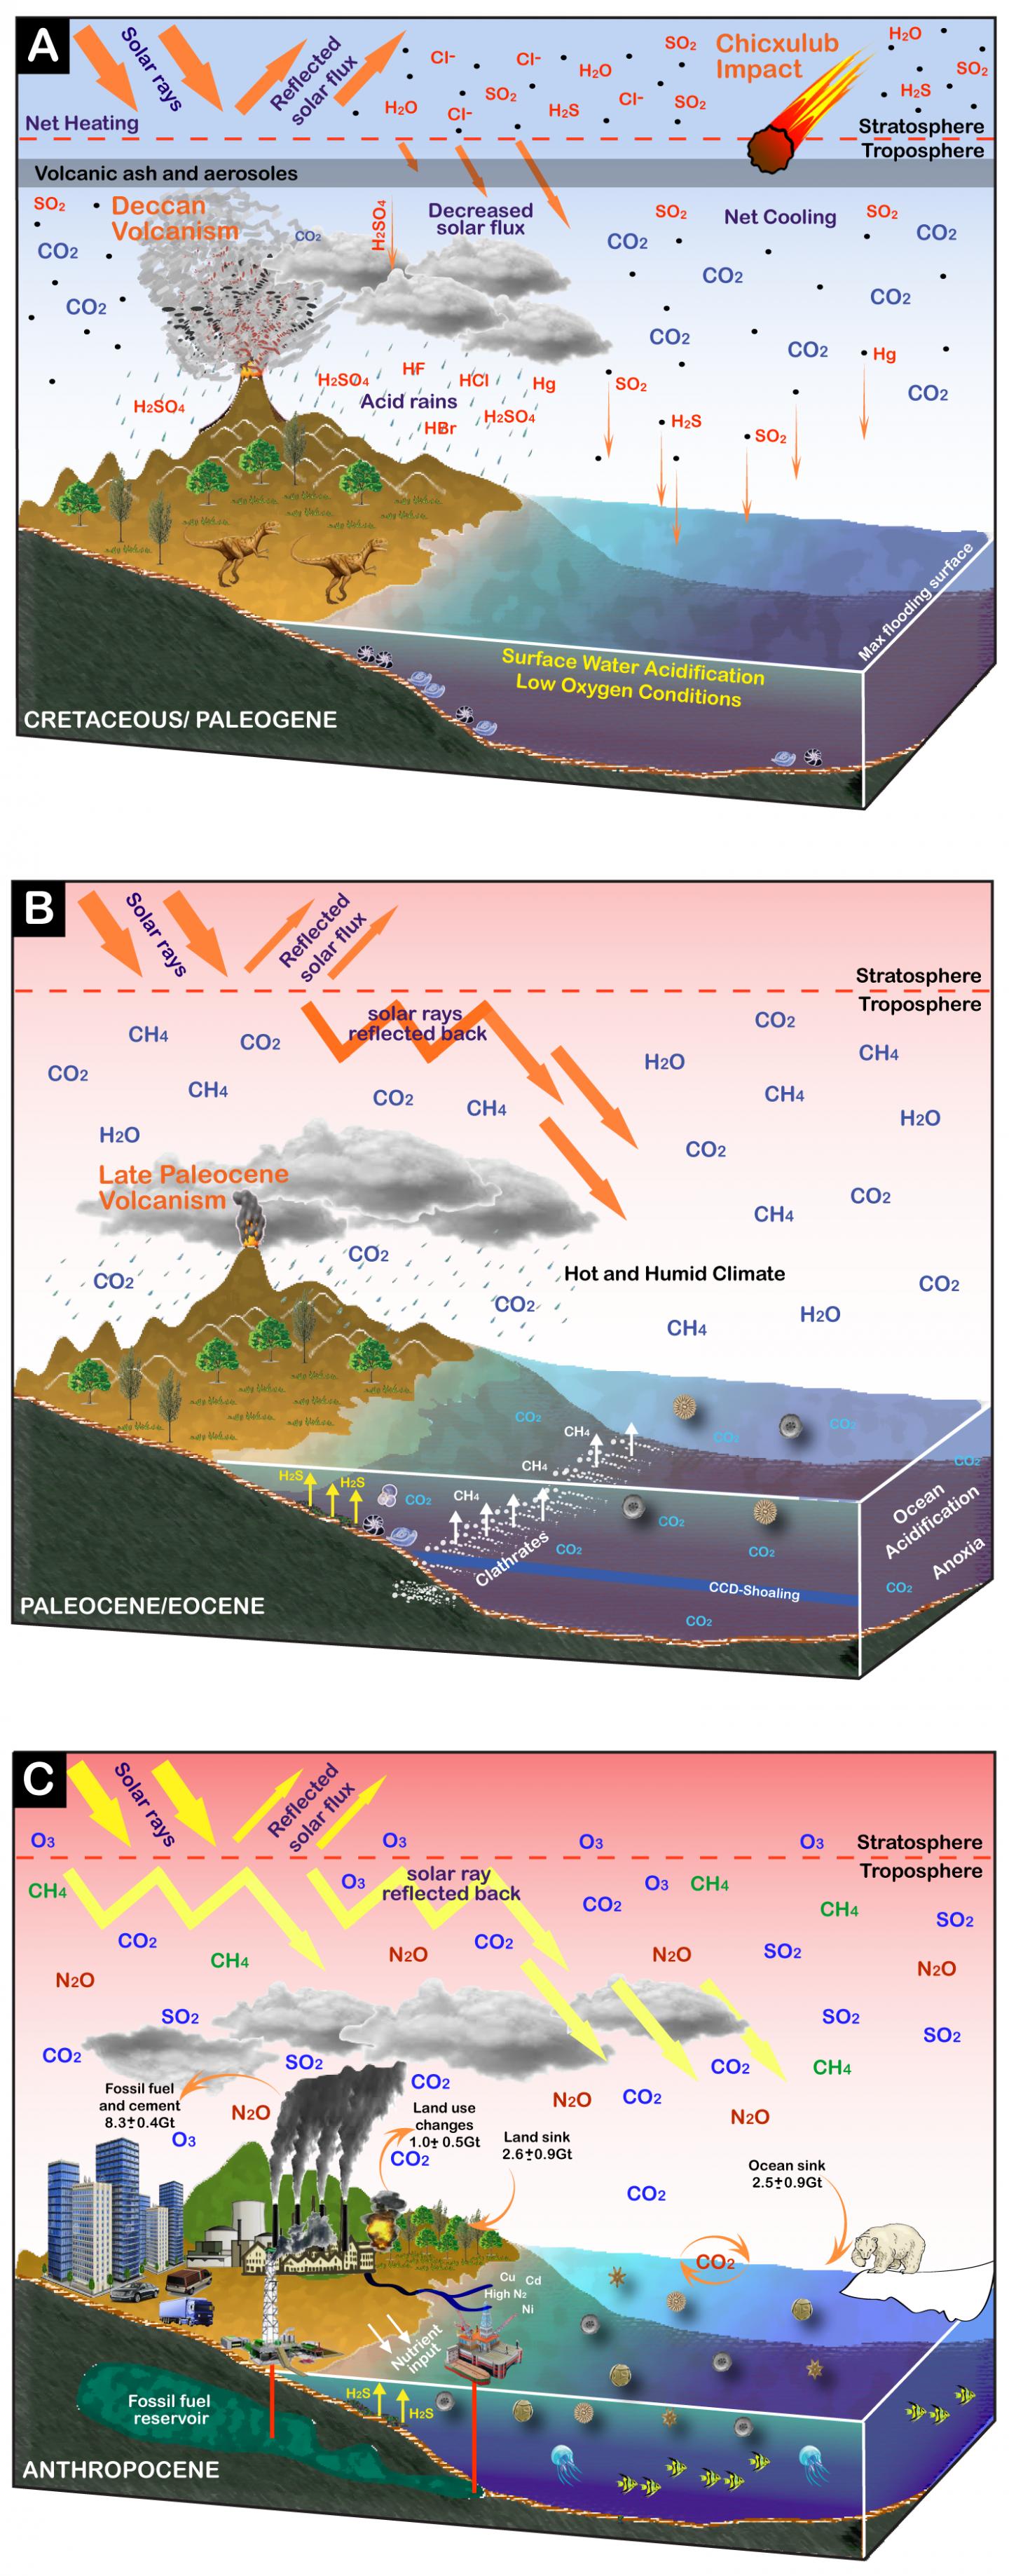 Illustration of the KPB Mass Extinction, the PETM, and Anthropocene Climate Warming